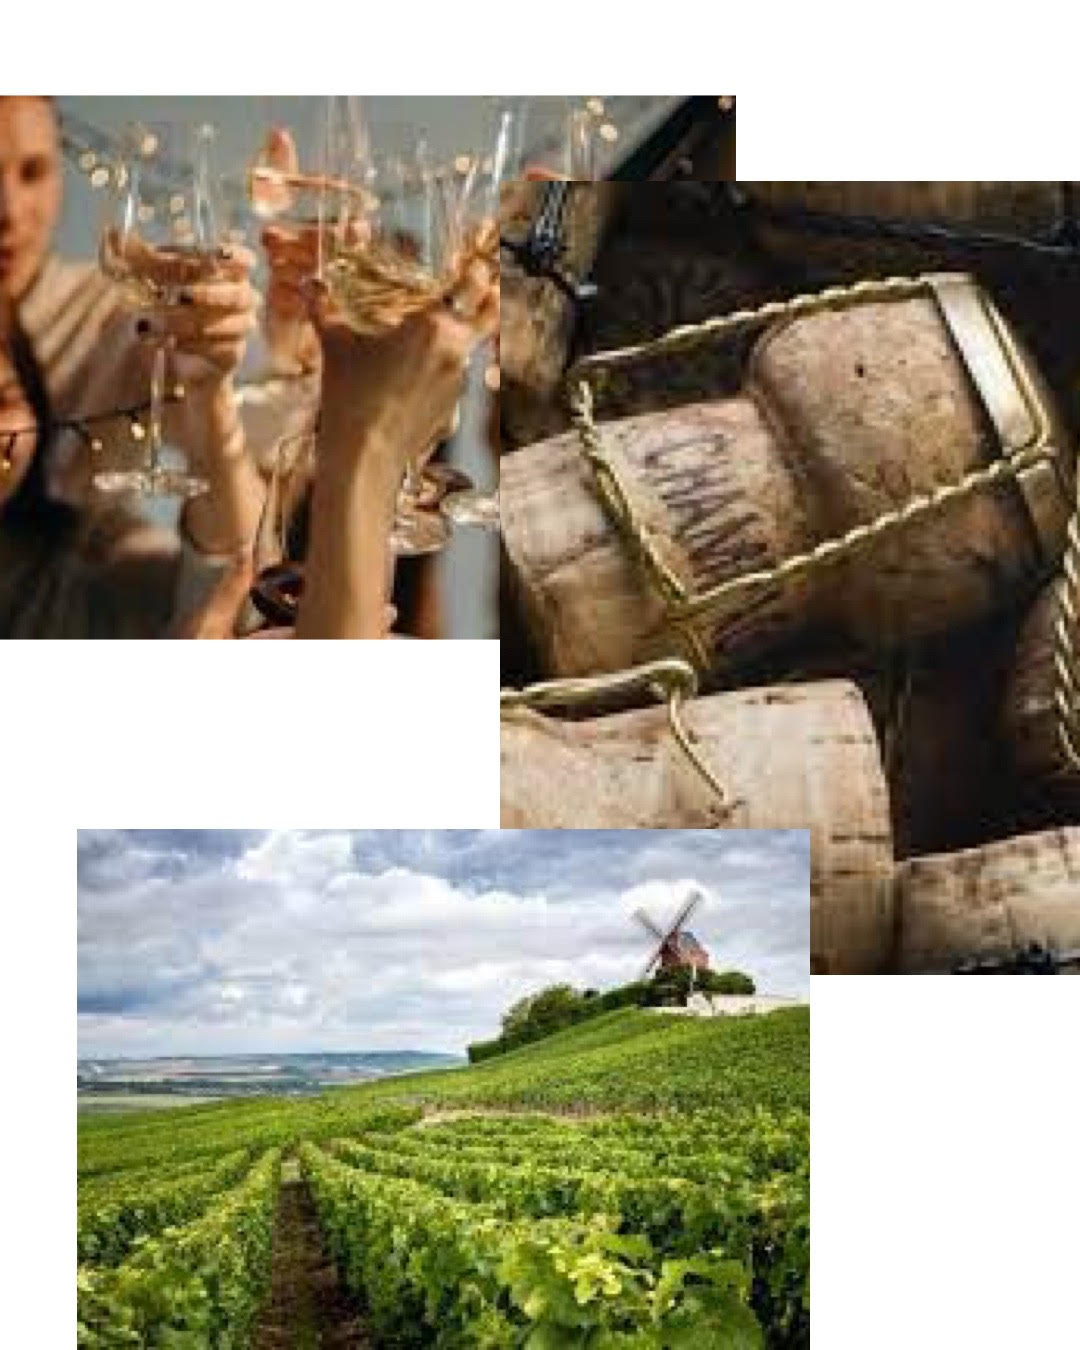 Champagne News:  Total shipments of Champagne in 2021 rose to 322 million bottles, an increase of 32% over 2020